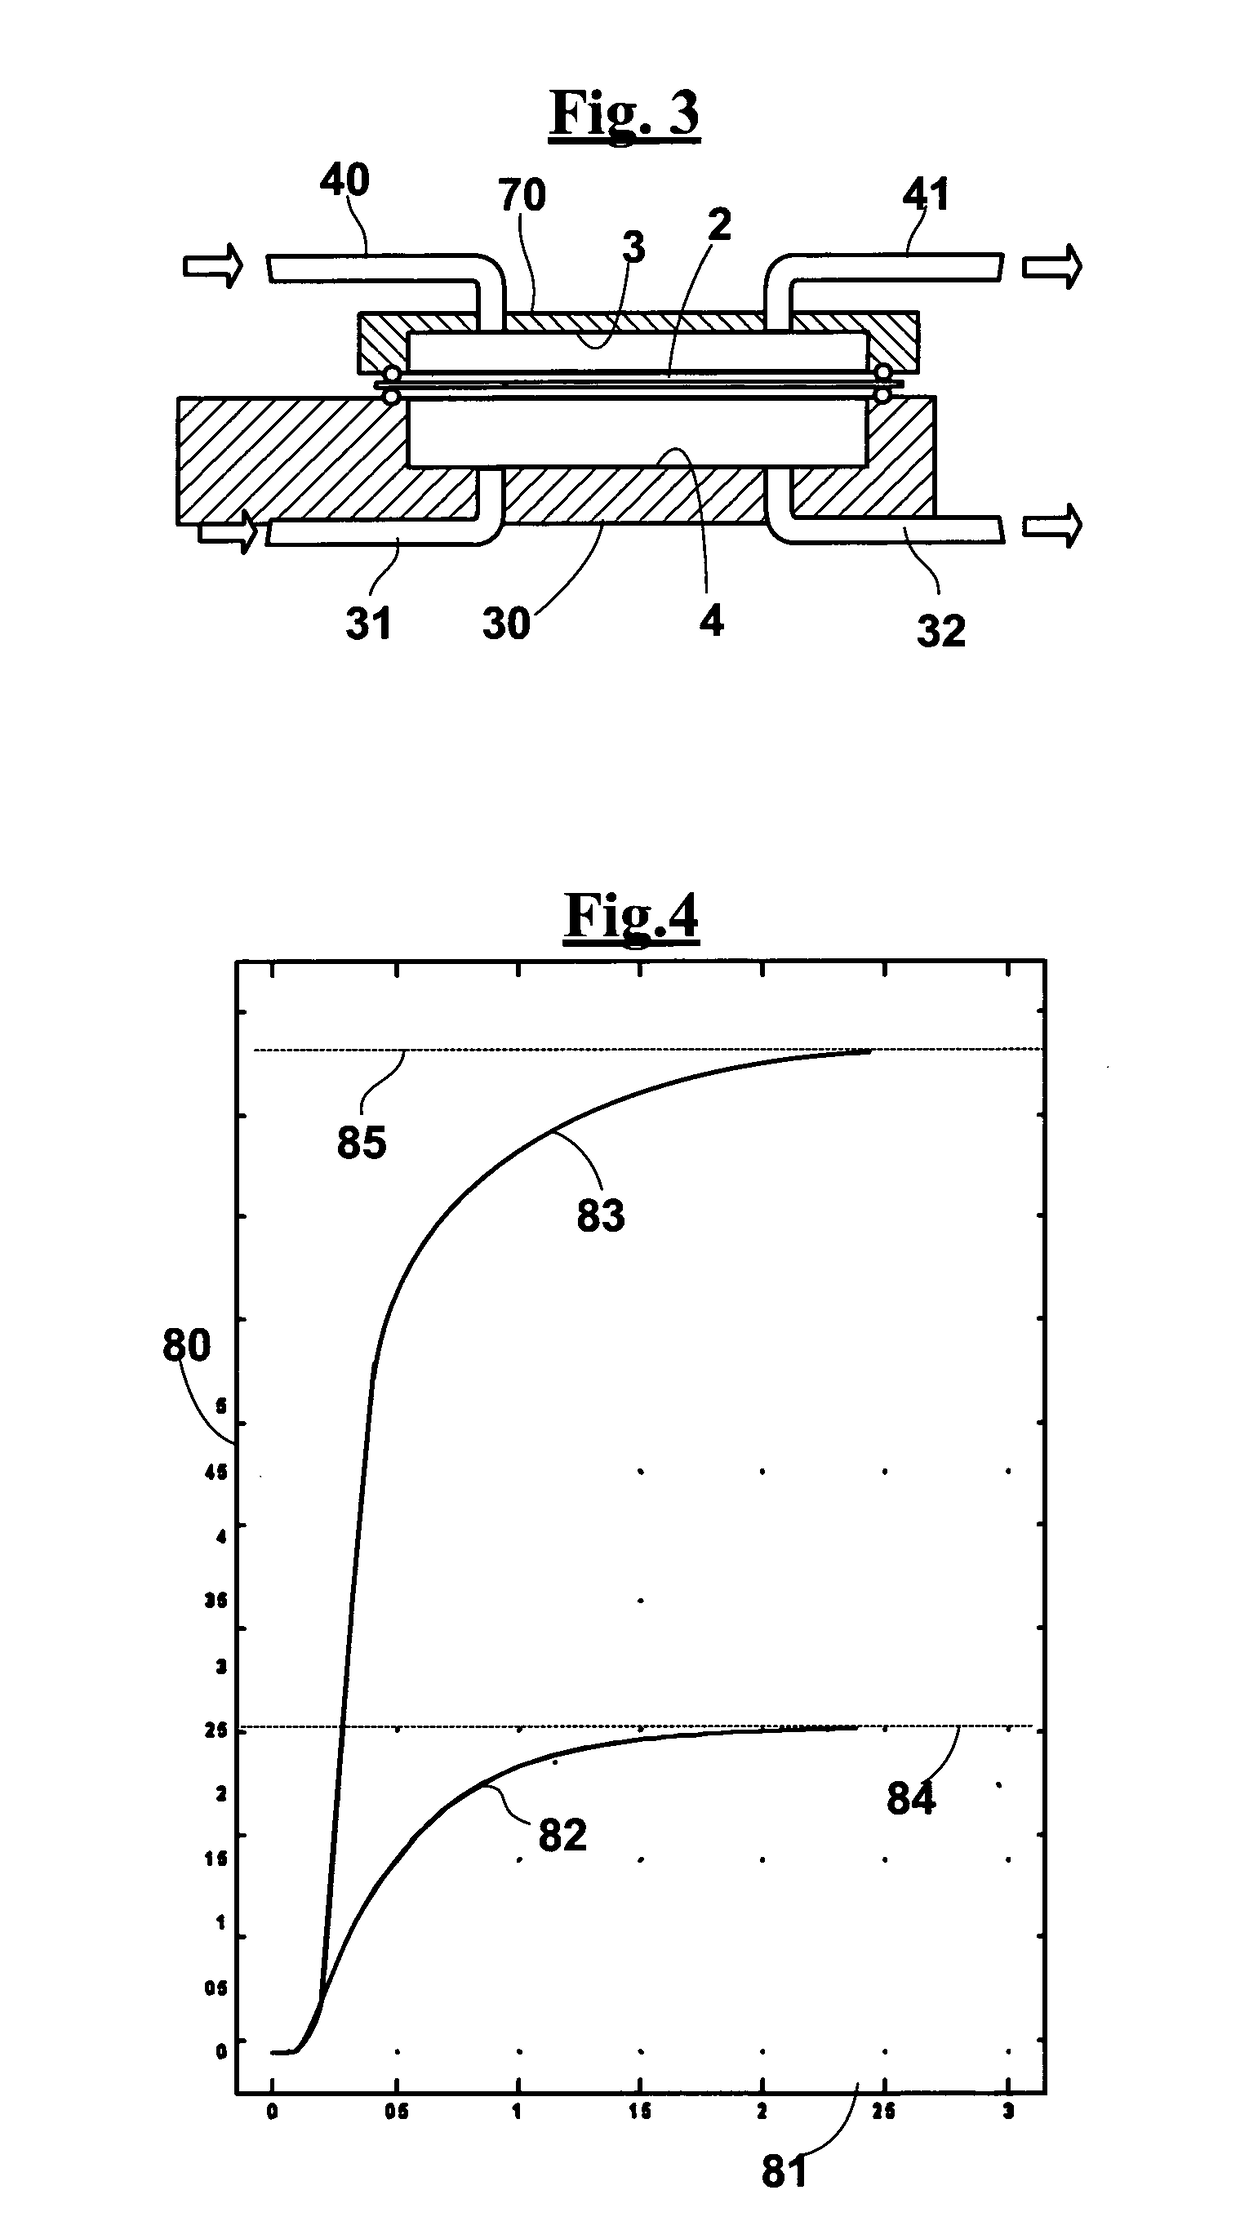 Method and device for measuring the gas permeability through films and walls of containers